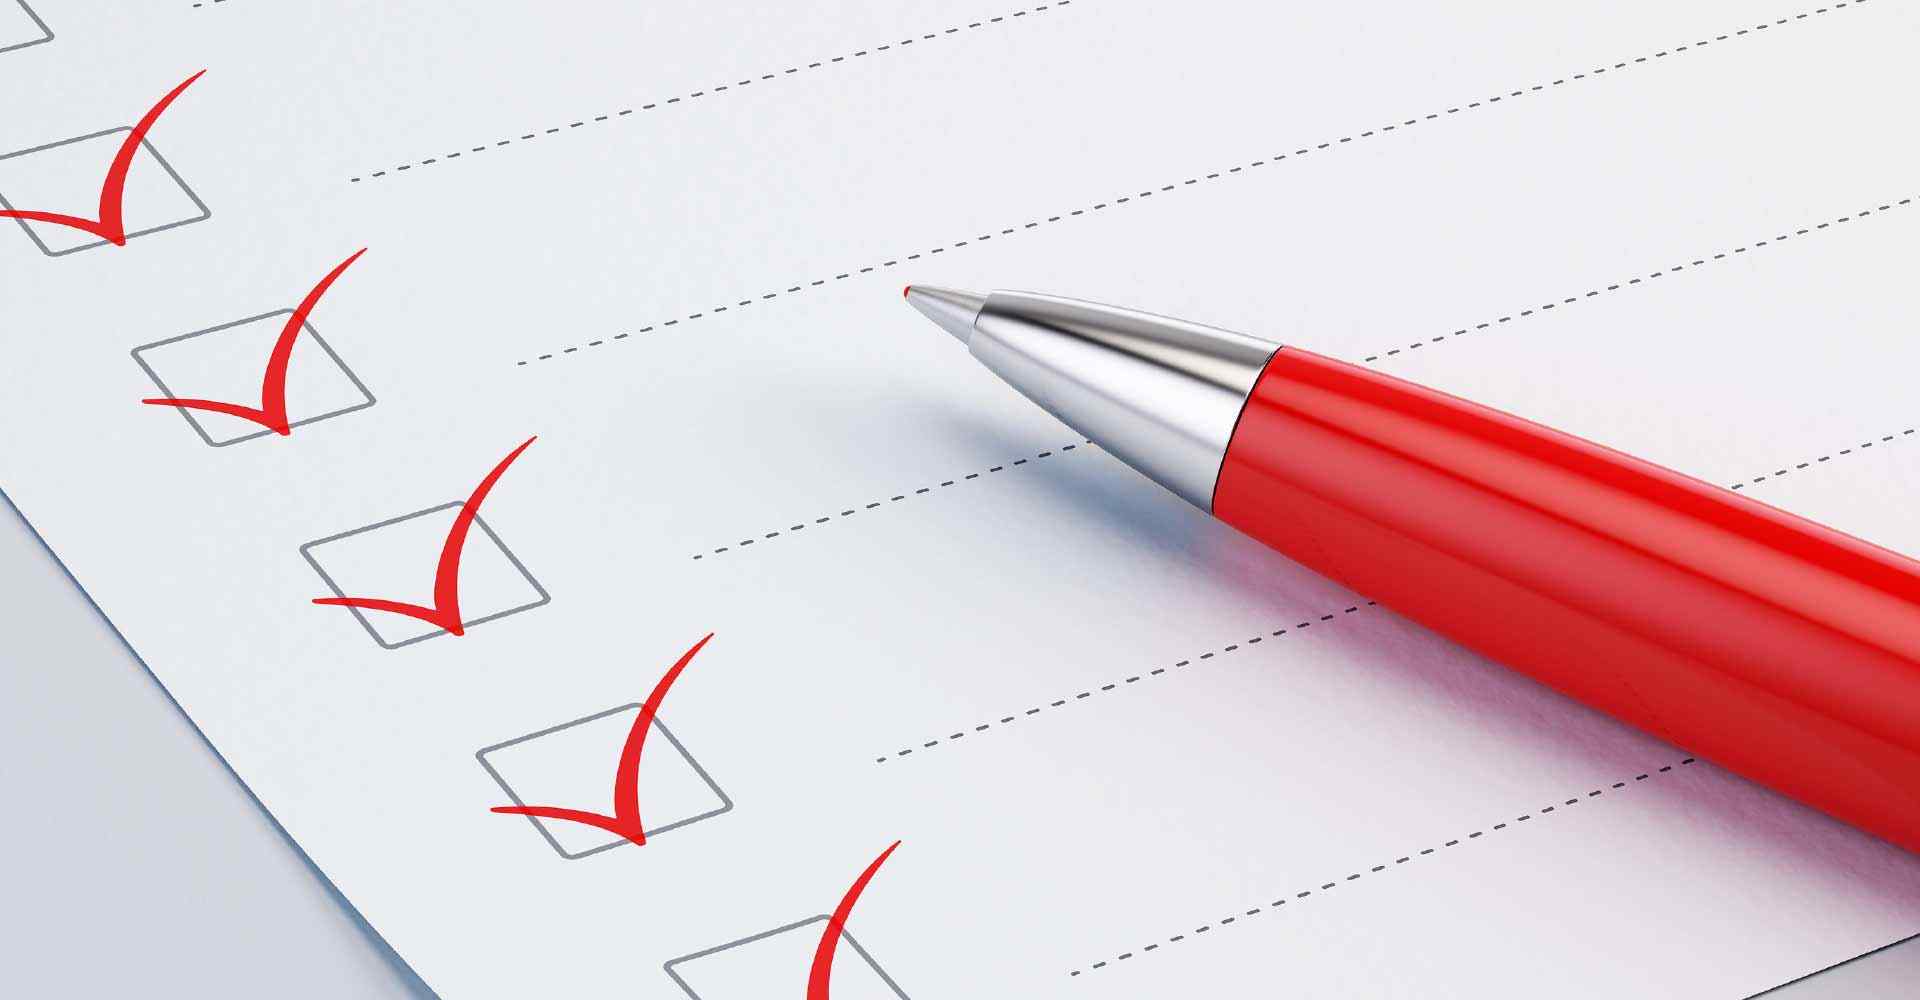 A checklist used by Home Health Care business owner to manage HIPAA associated regulatory updates